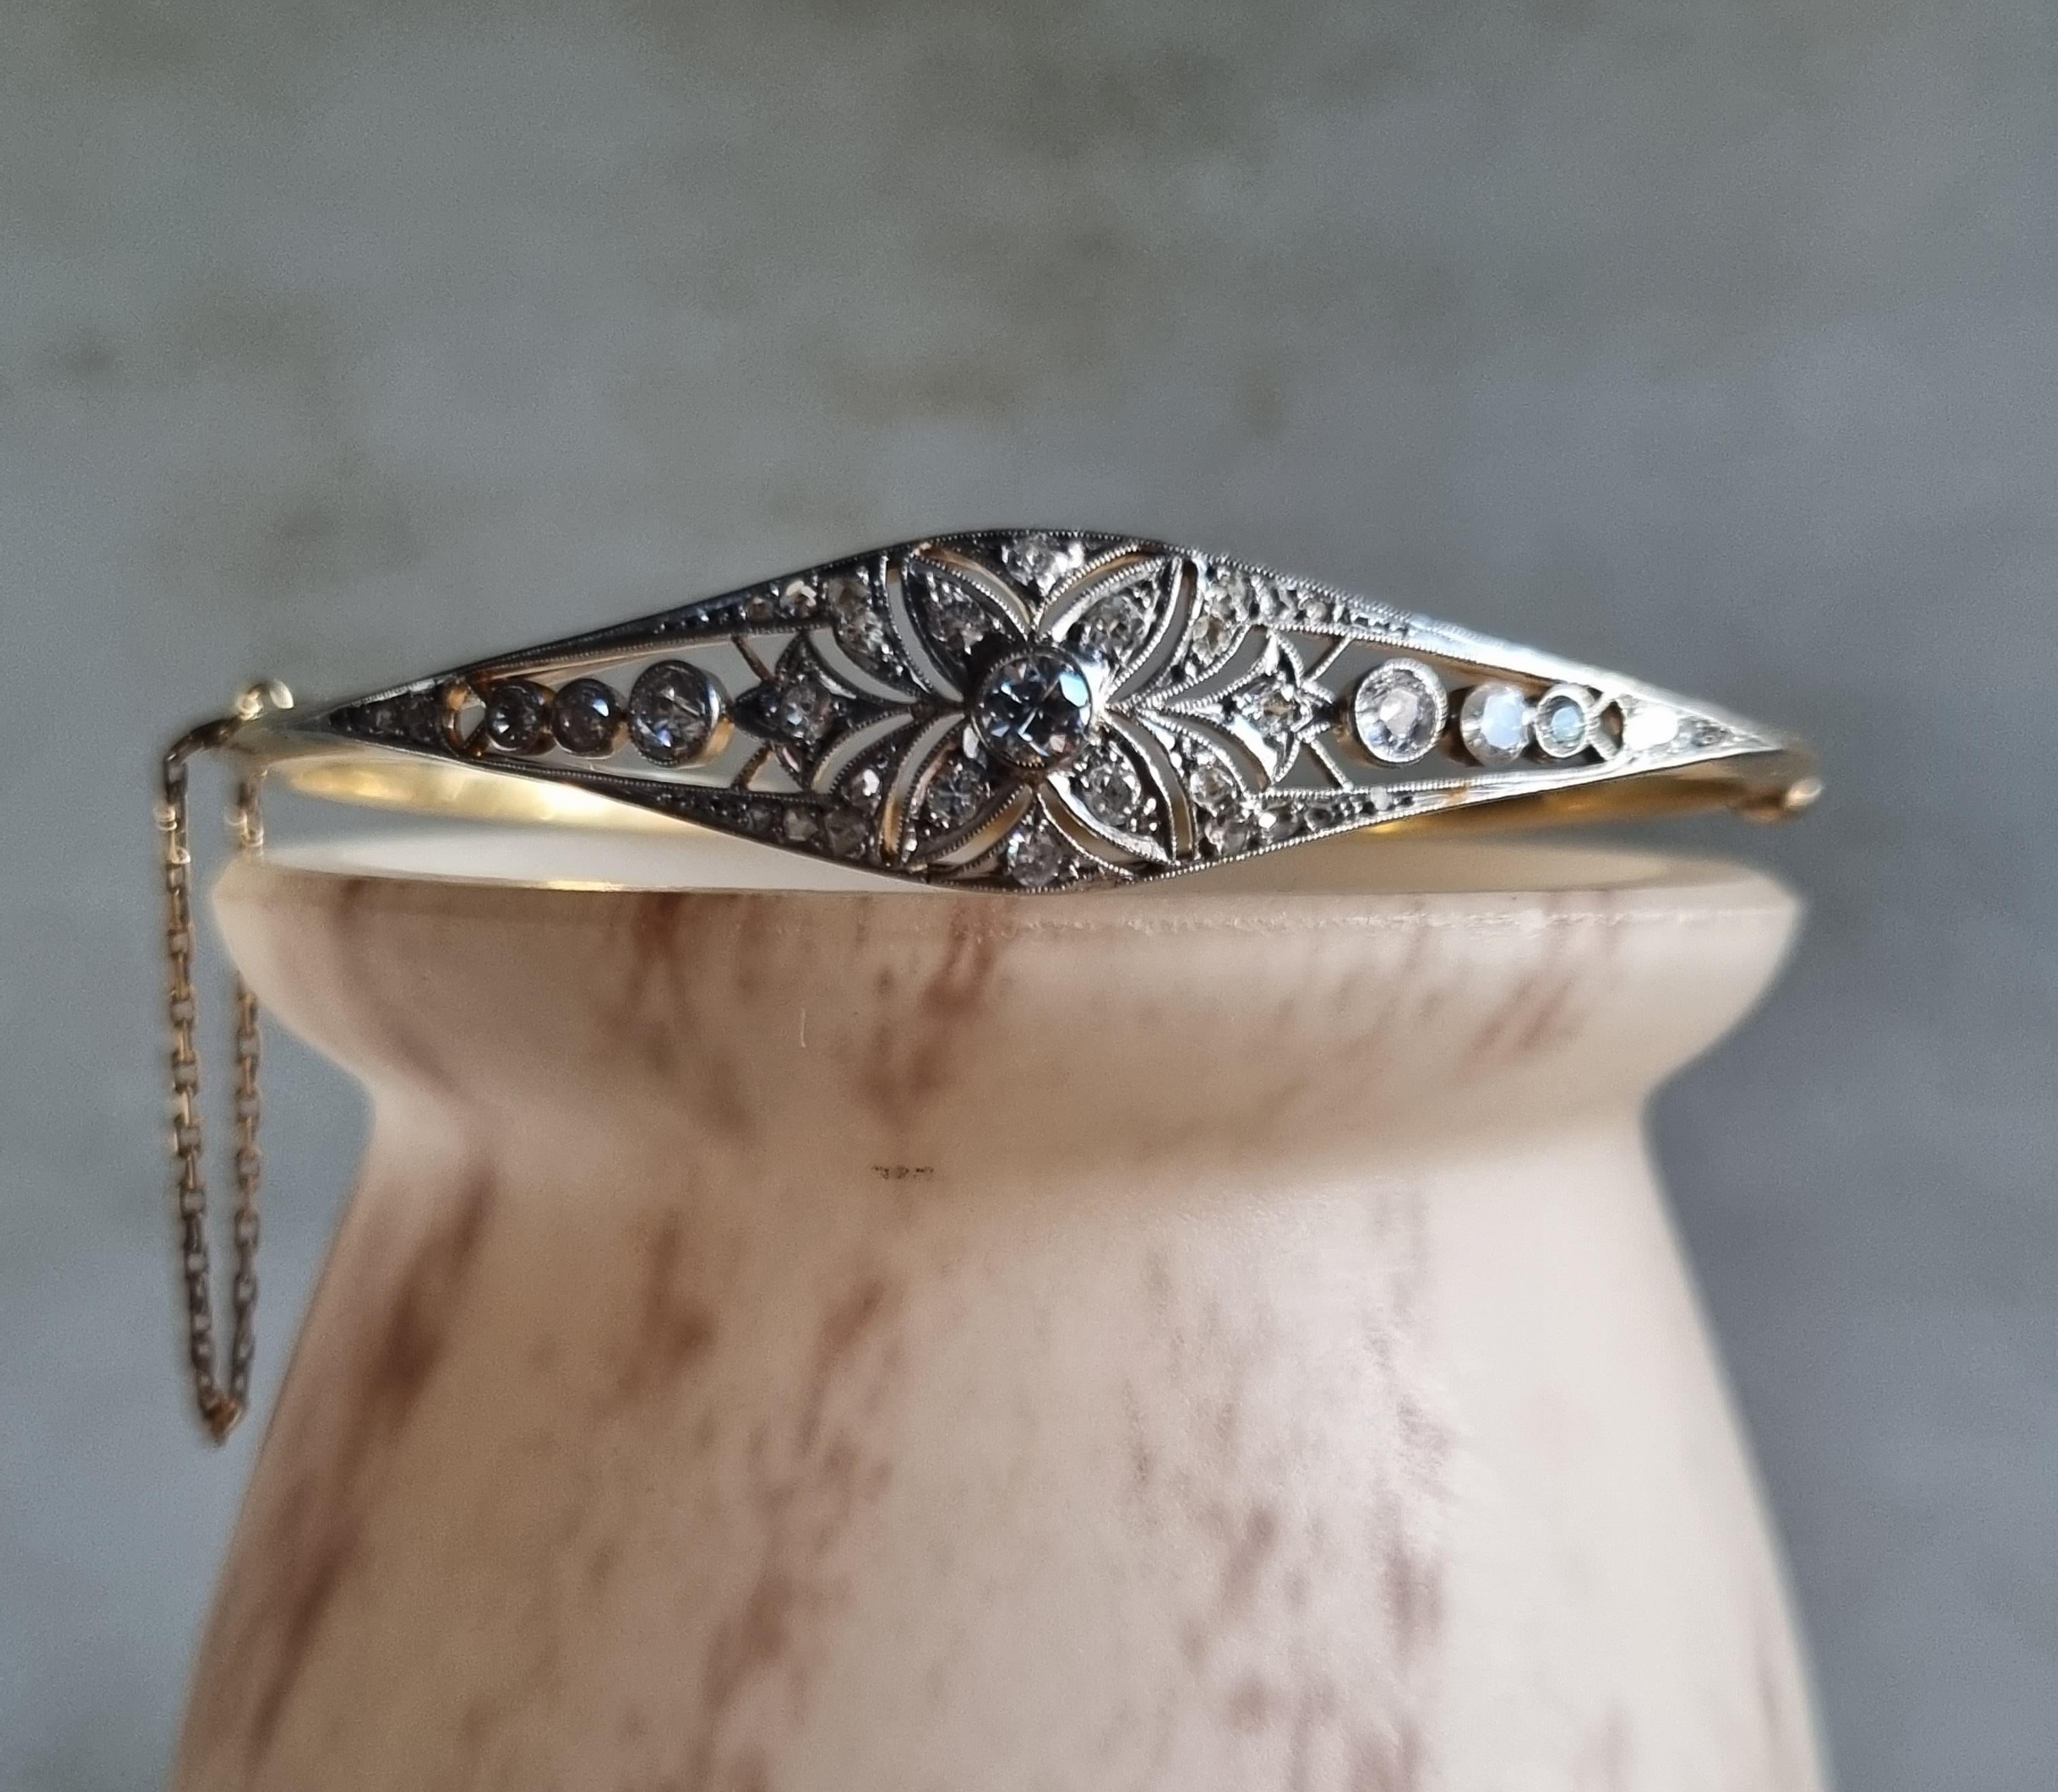 Antique Edwardian Diamond Bangle Bracelet (1901 - 1915) In Good Condition For Sale In OVIEDO, AS